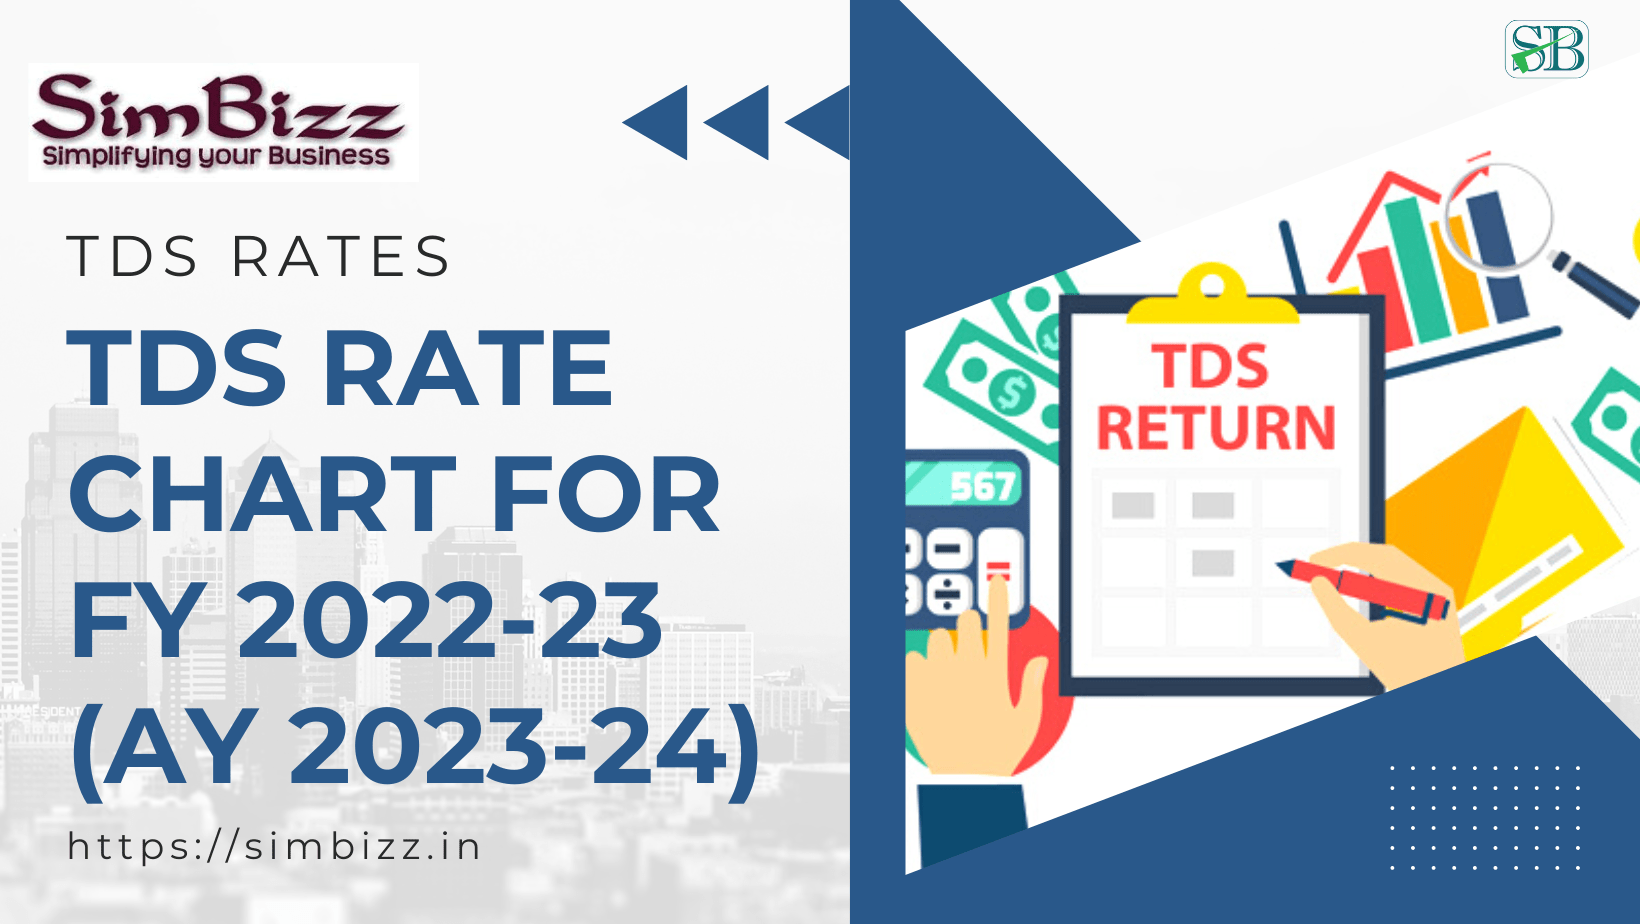 Tds Rate Chart For Fy 2022 23 Ay 2023 24 Simbizz 2046